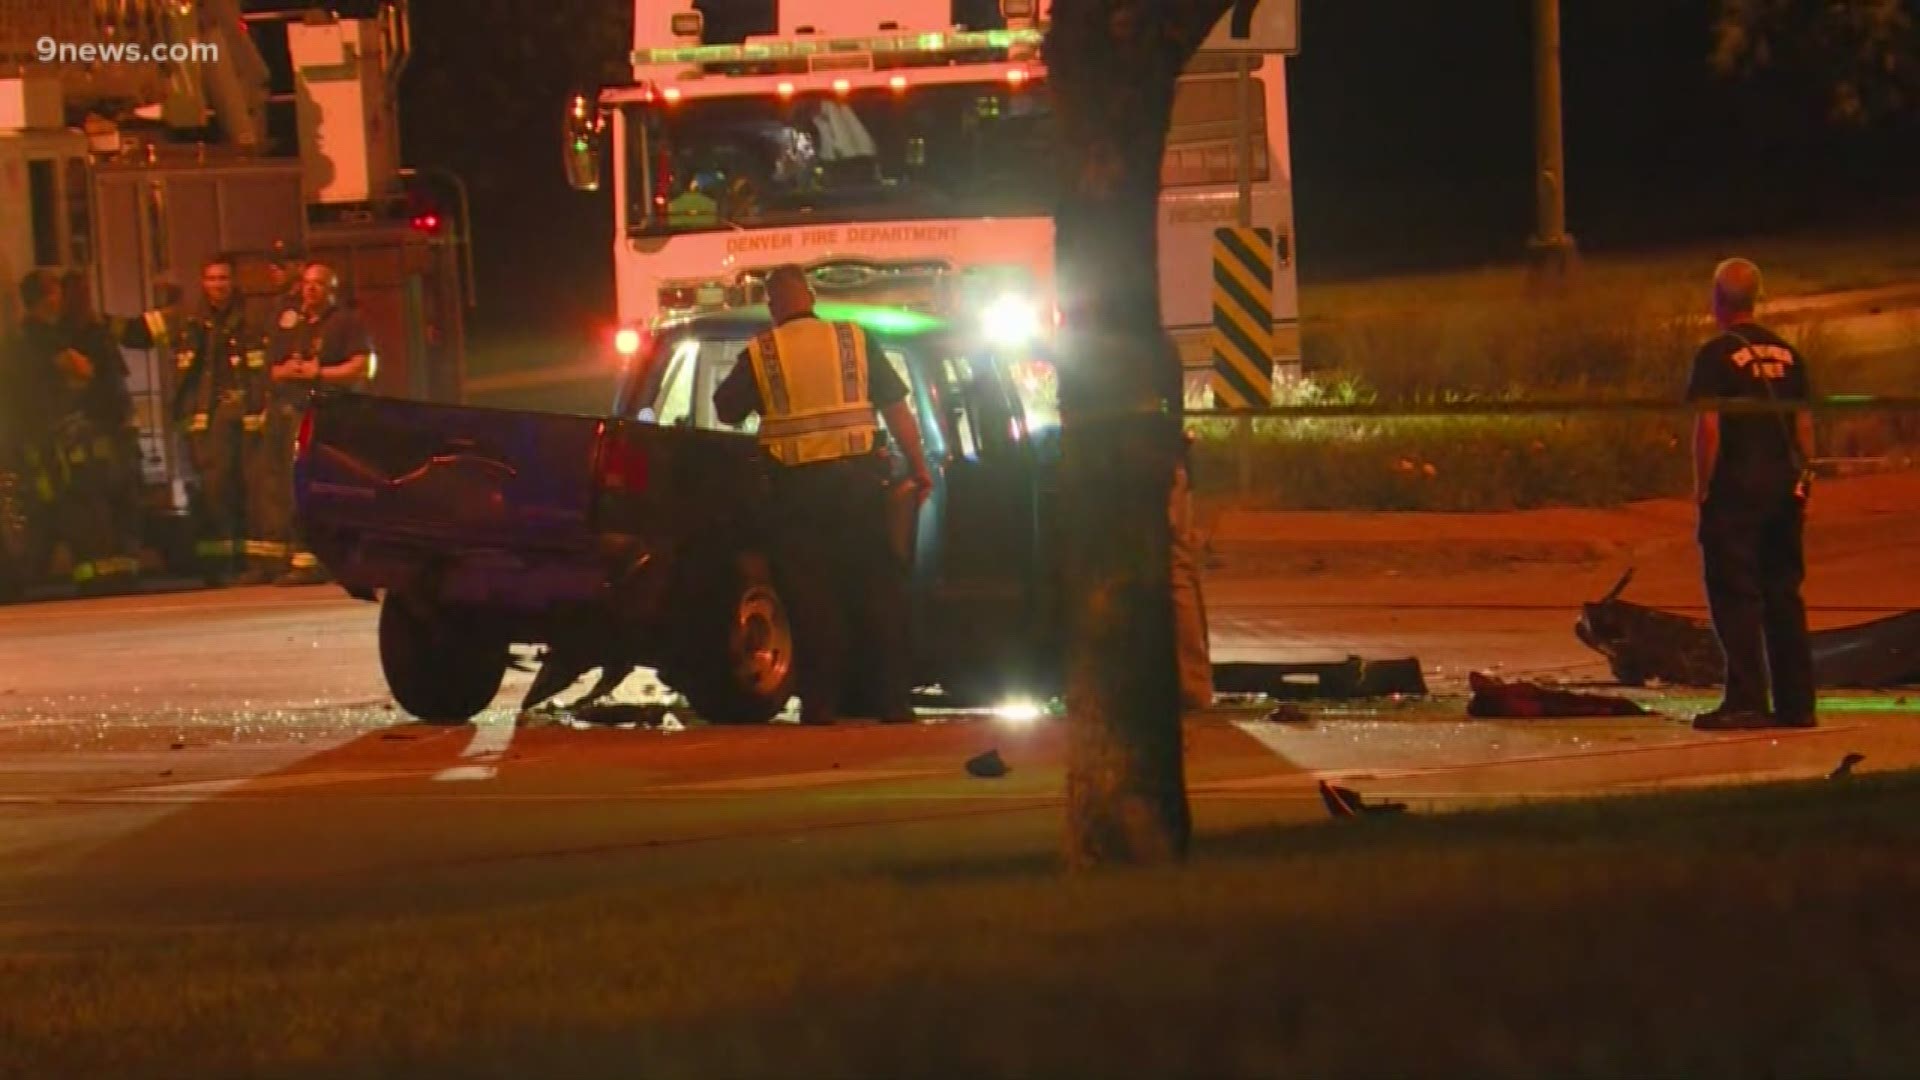 One person was killed in the crash Sunday night near East 46th Avenue and North Chambers Road.